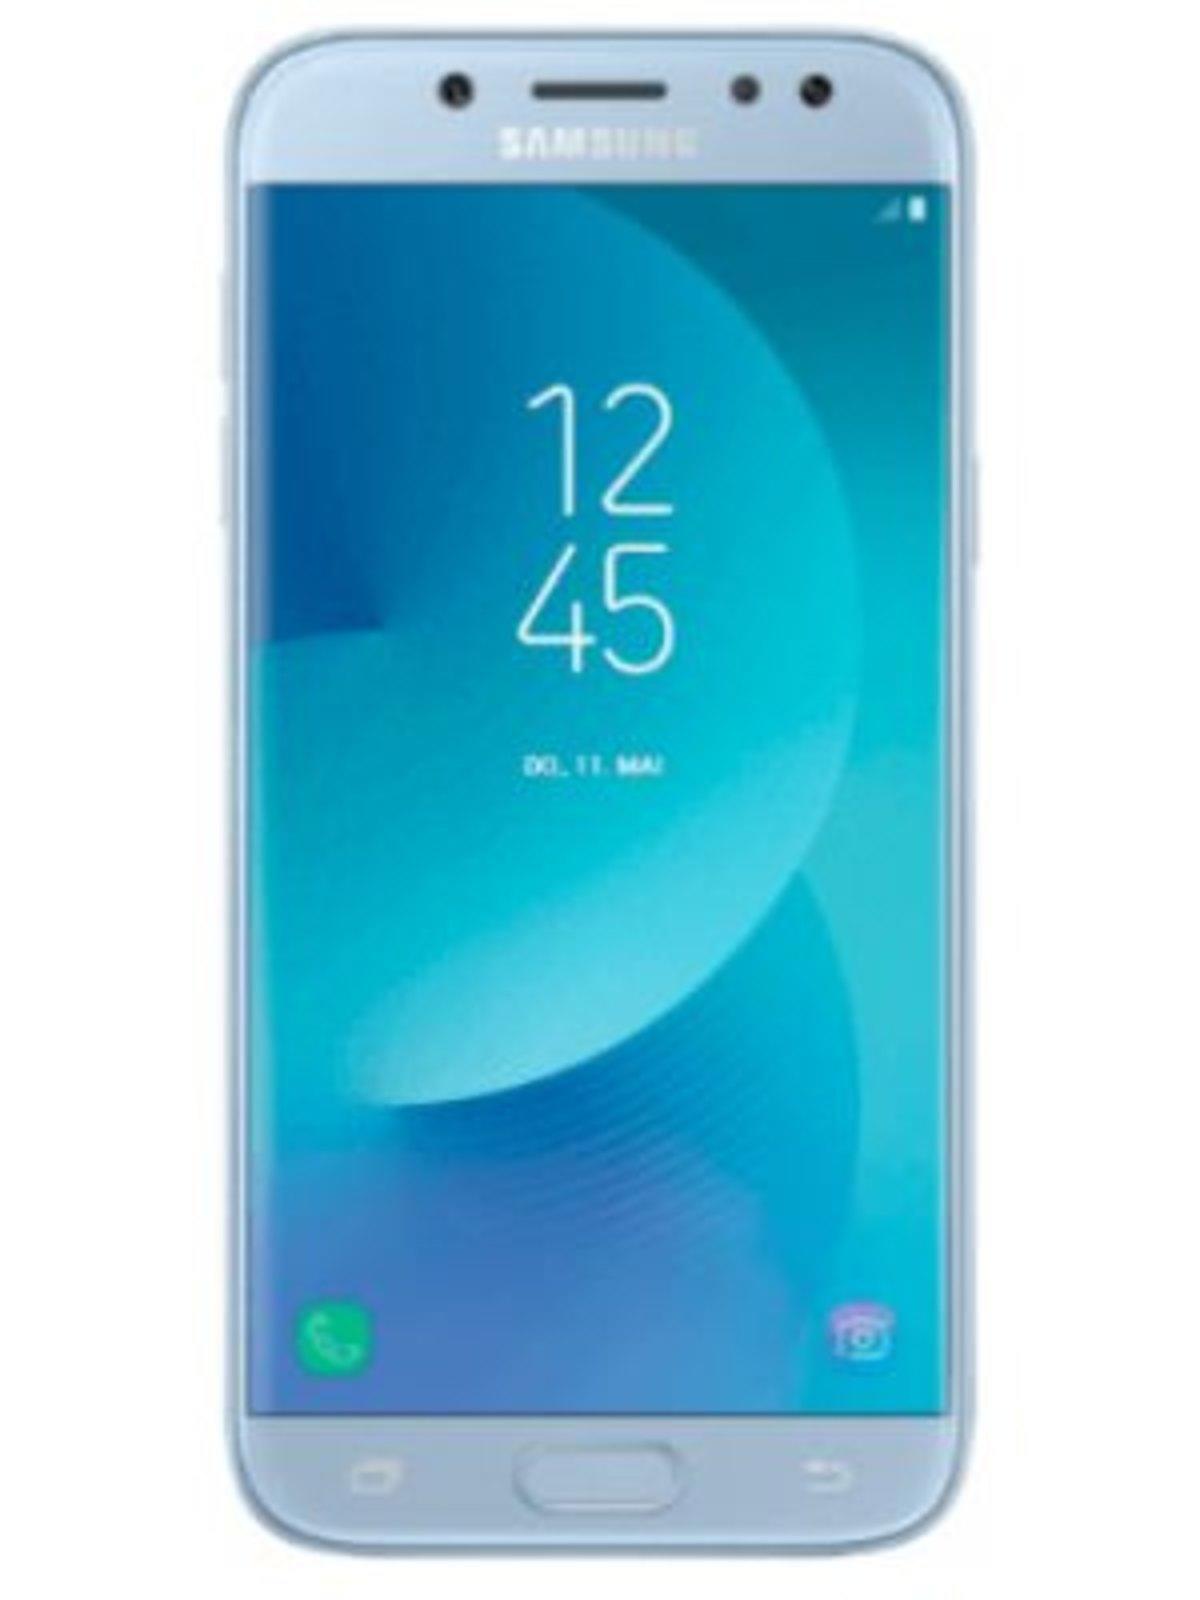 Samsung Galaxy J5 Pro Expected Price Full Specs Release Date 7th Mar 22 At Gadgets Now